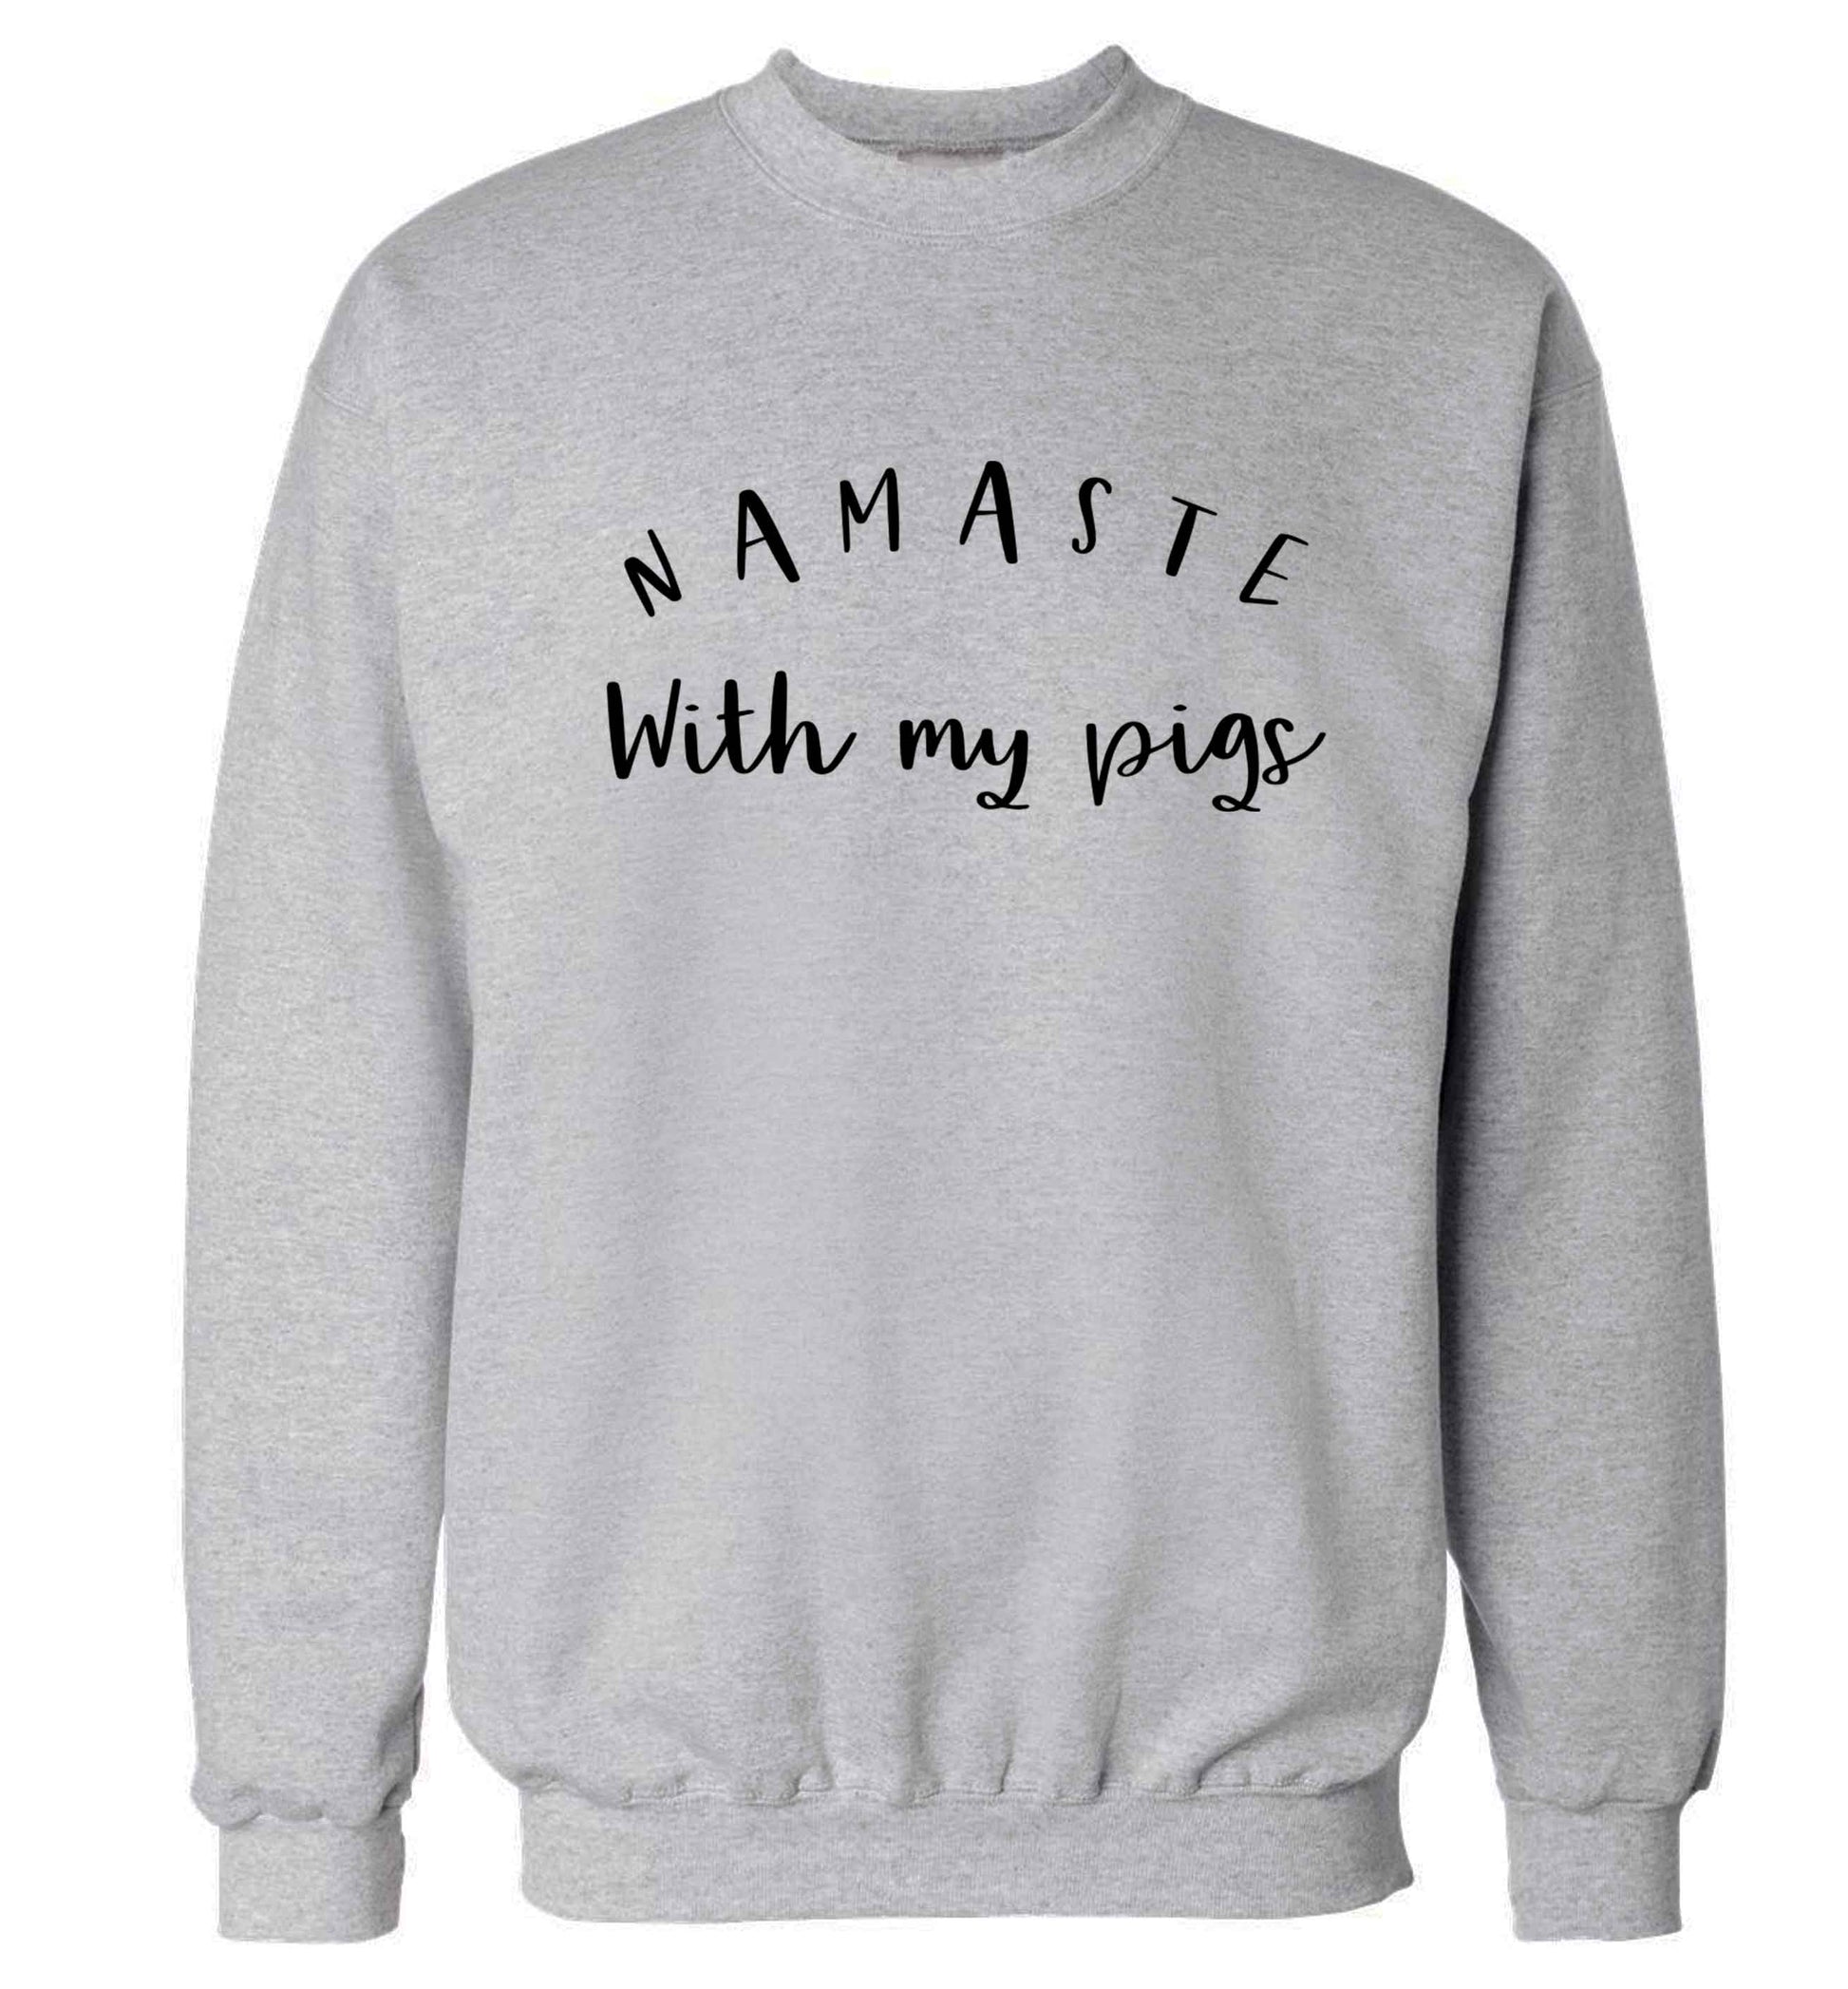 Namaste with my pigs Adult's unisex grey Sweater 2XL